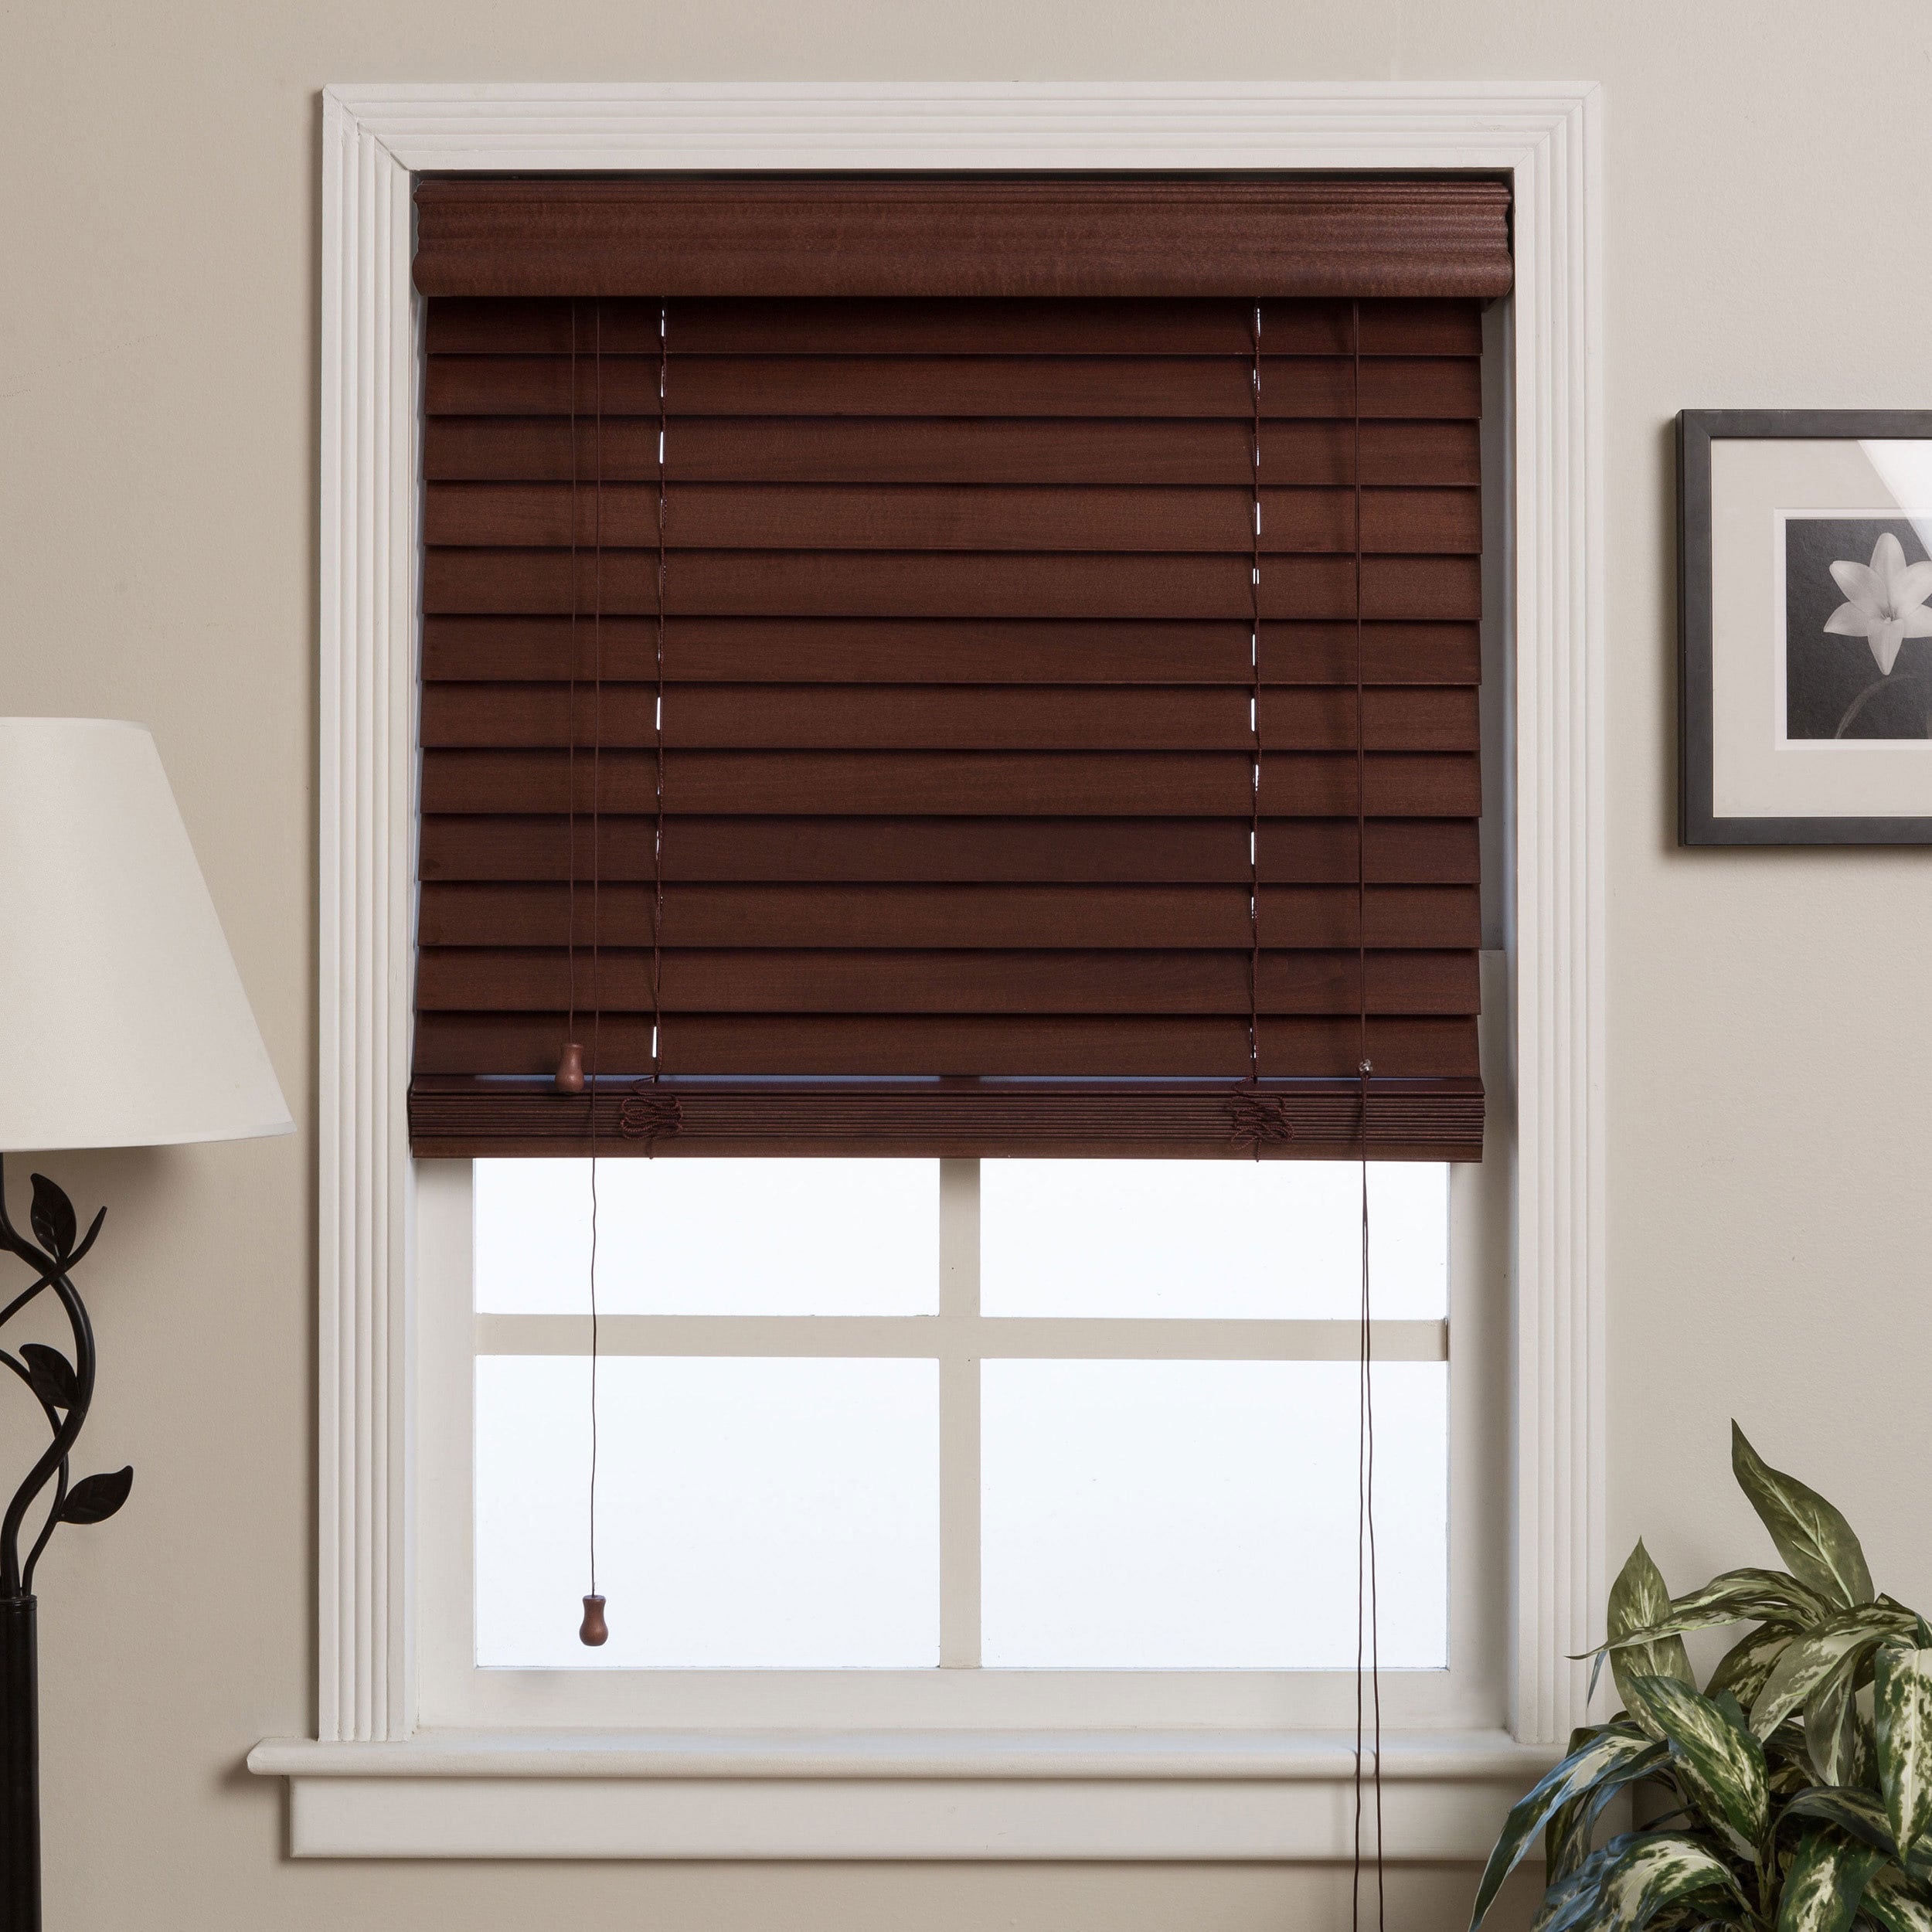 wooden window blinds shop arlo blinds customized 27-inch real wood window blinds - on sale UPPJZRW